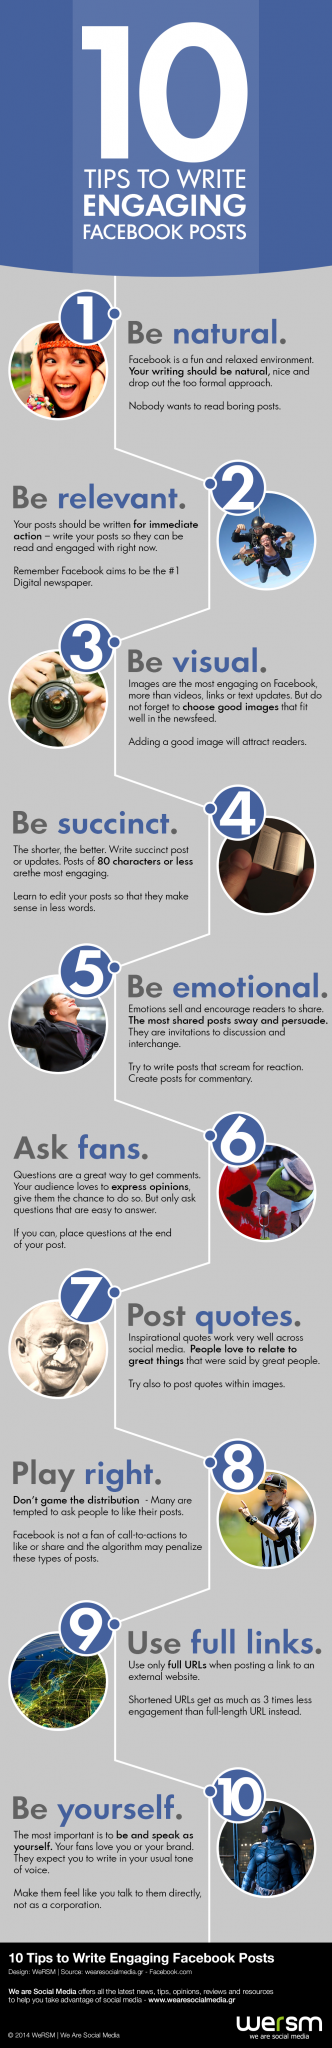 10 Tips to write engaging Facebook Posts